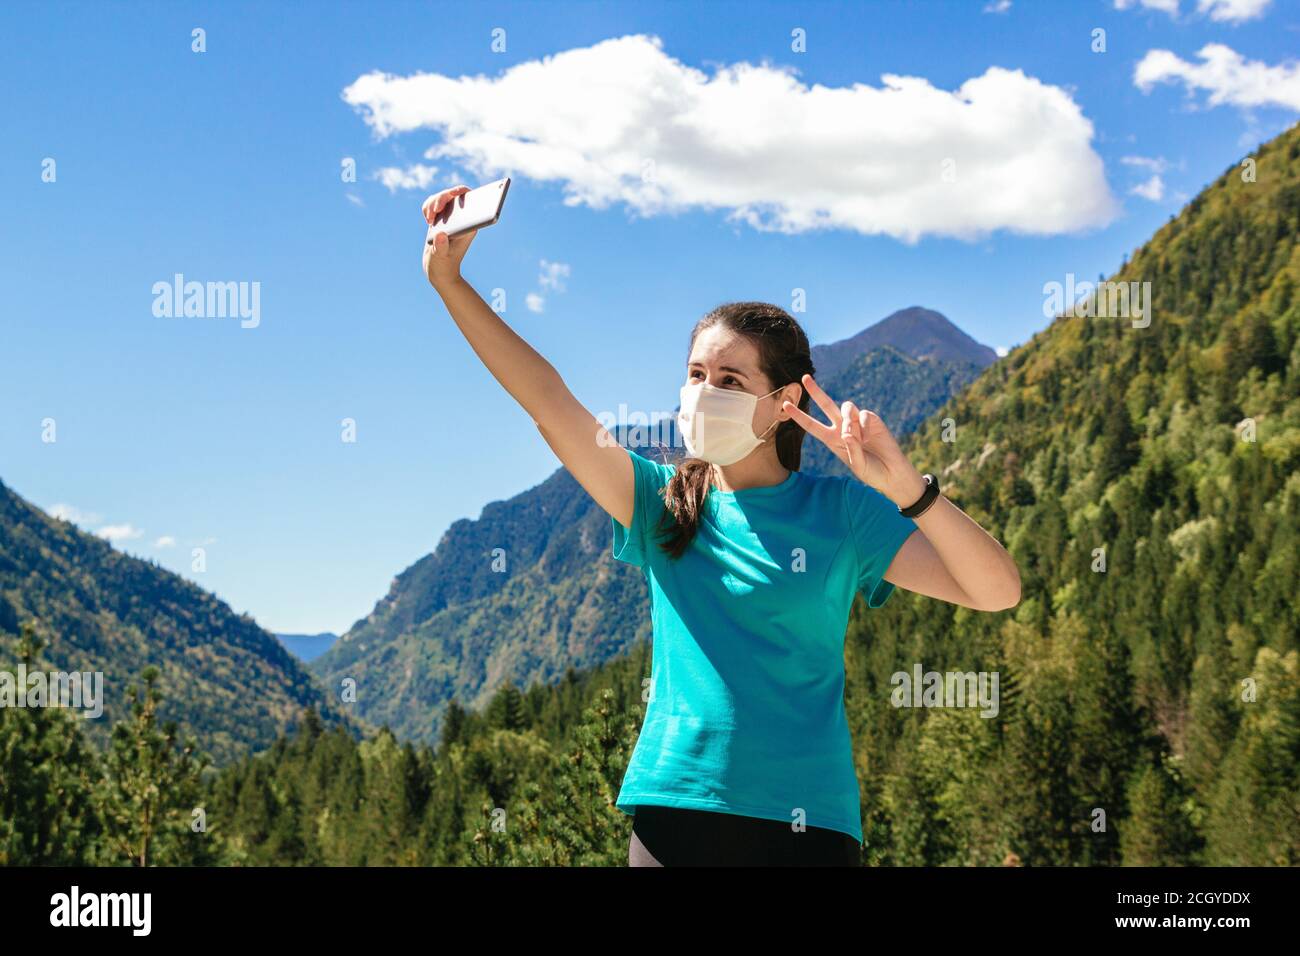 Stock photo of a 30's woman with face mask taking a selfie with phone while enjoying the mountains and a beautiful landscapes on a sunny day Stock Photo